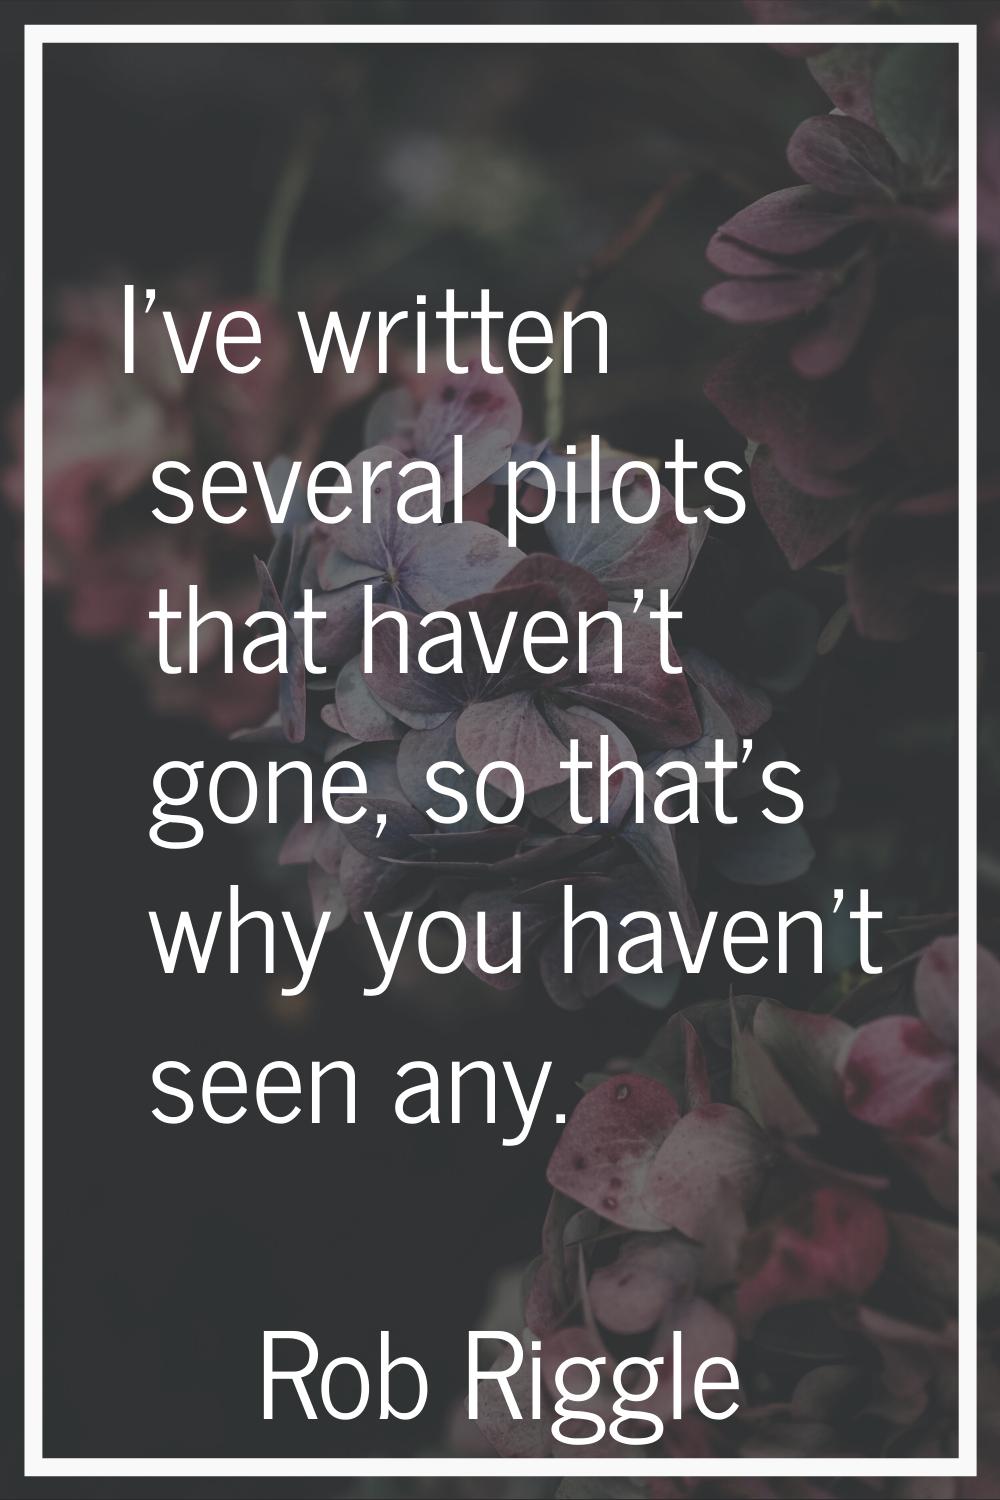 I've written several pilots that haven't gone, so that's why you haven't seen any.